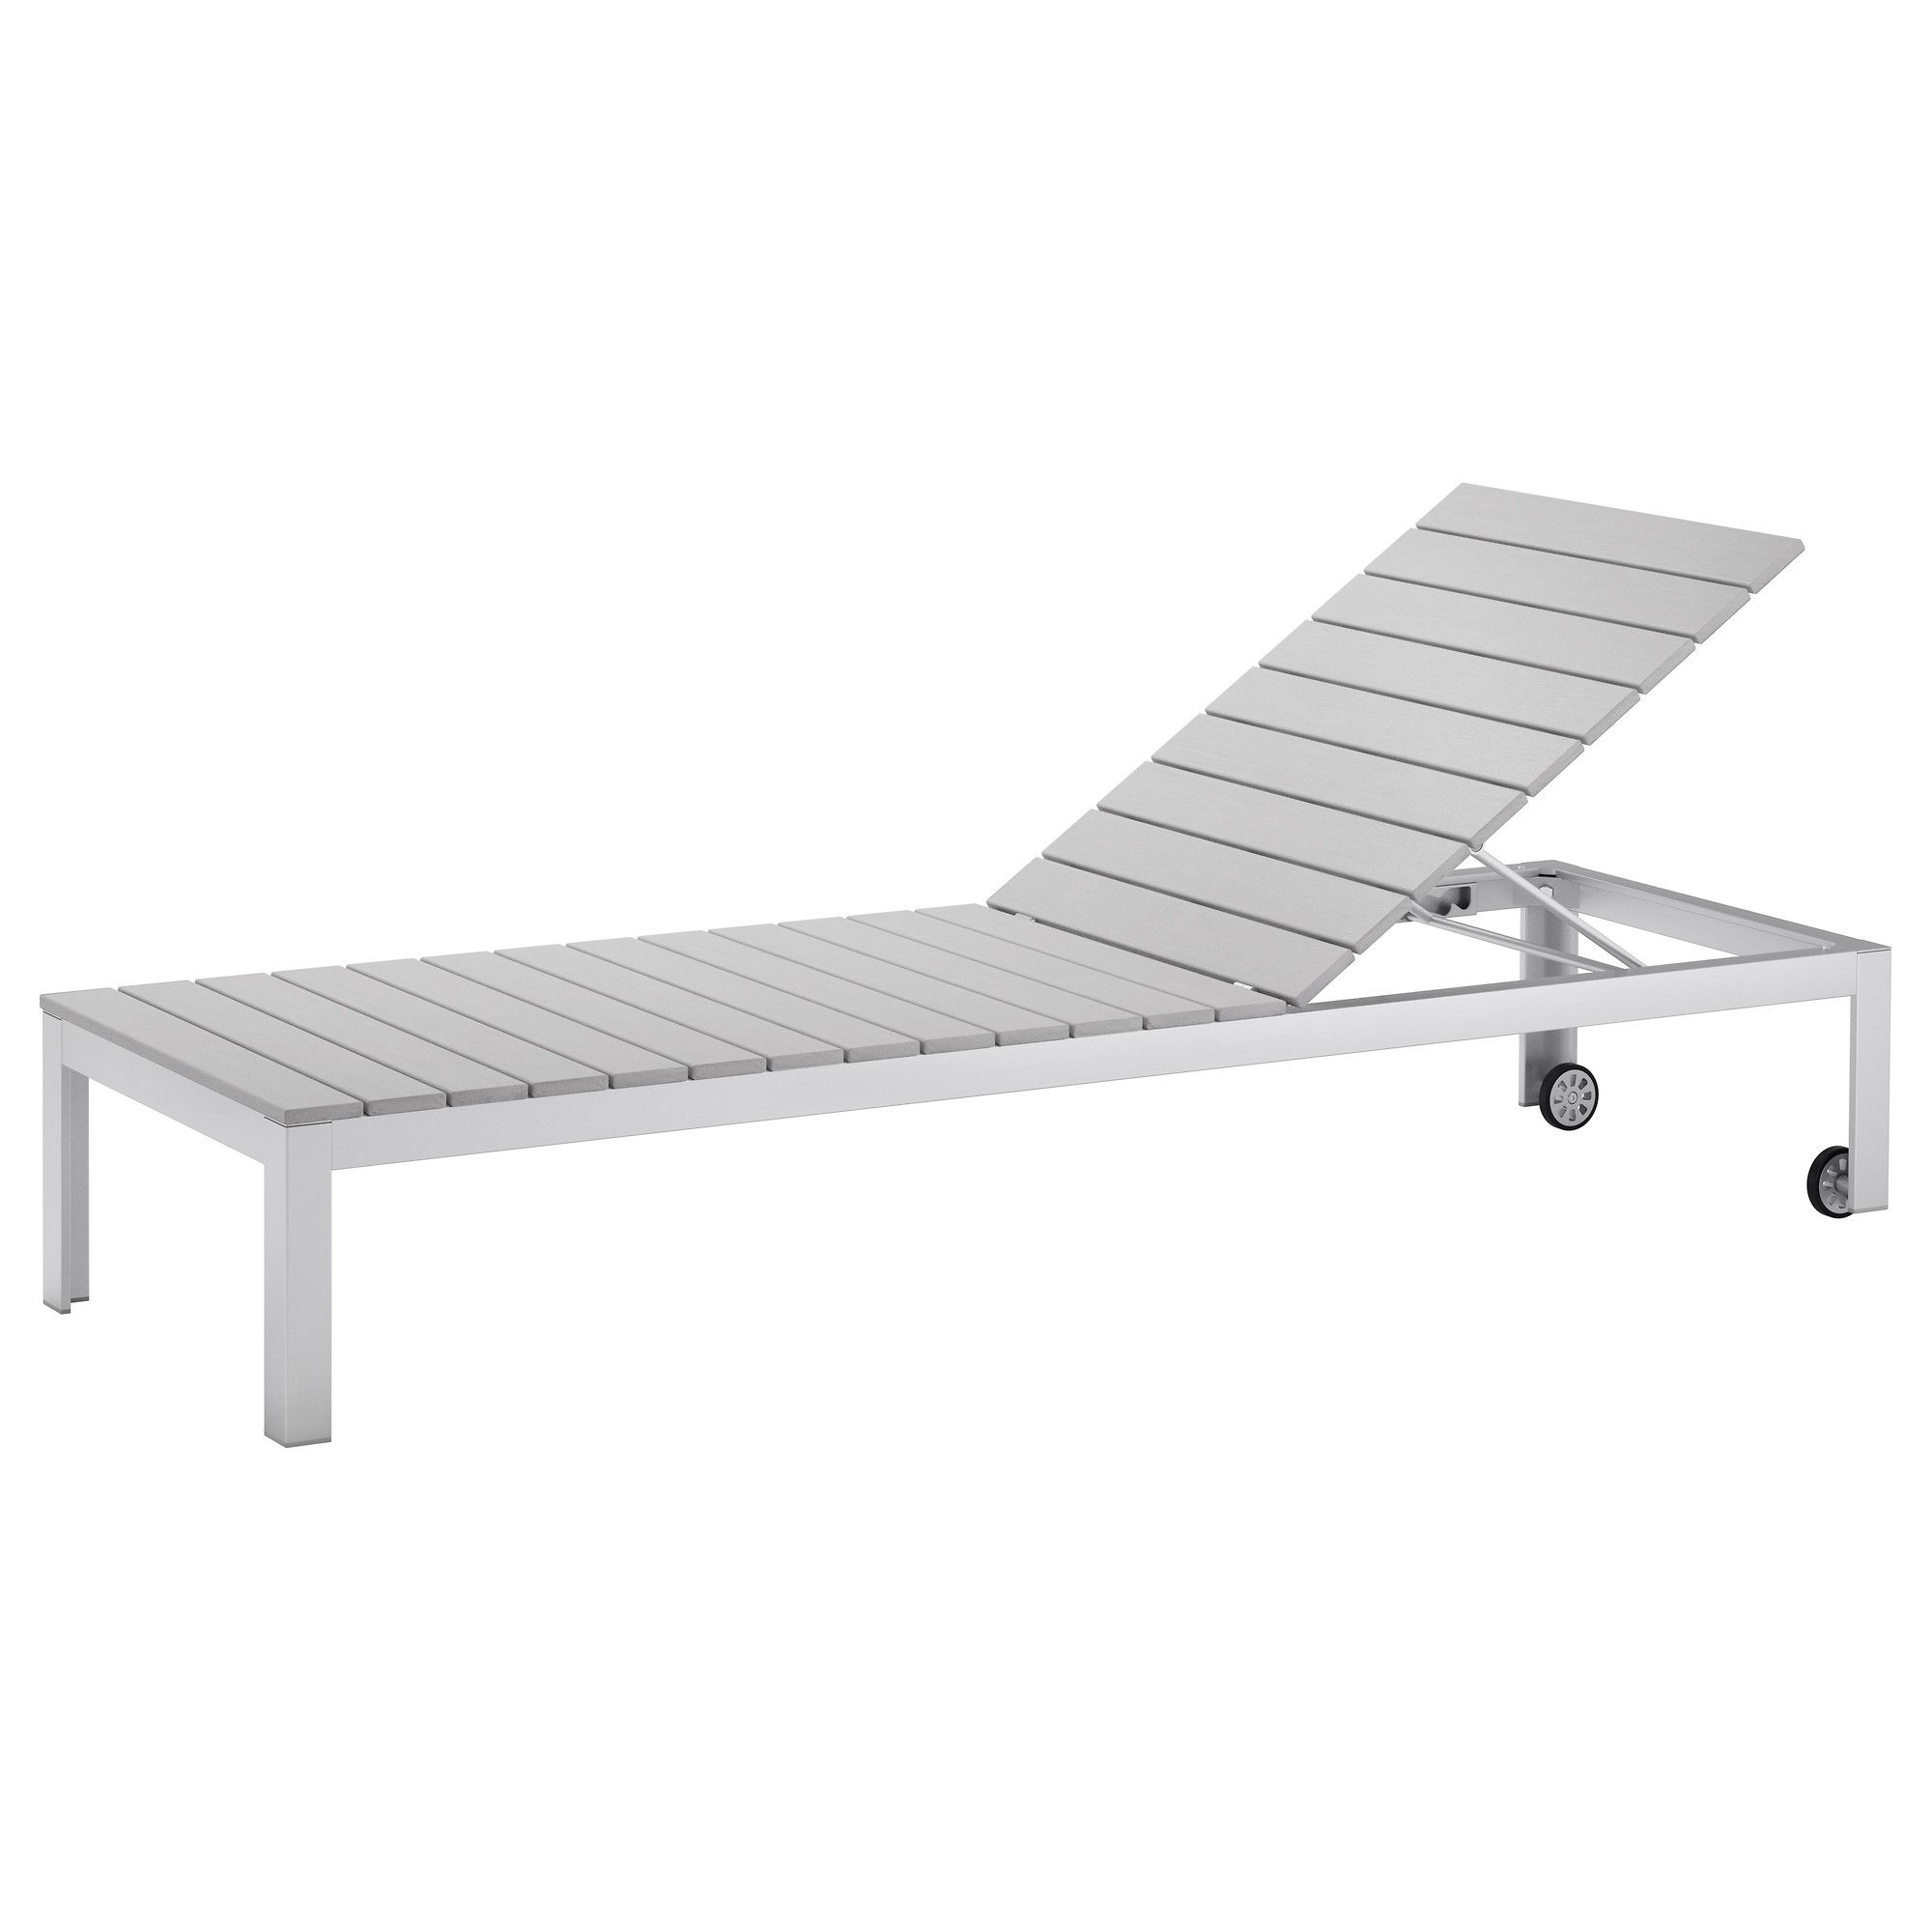 Most Popular Ikea Outdoor Chaise Lounge Chairs Within Ikea – Falster, Chaise, Gray, , , The Back Can Be Adjusted To Six (View 2 of 15)